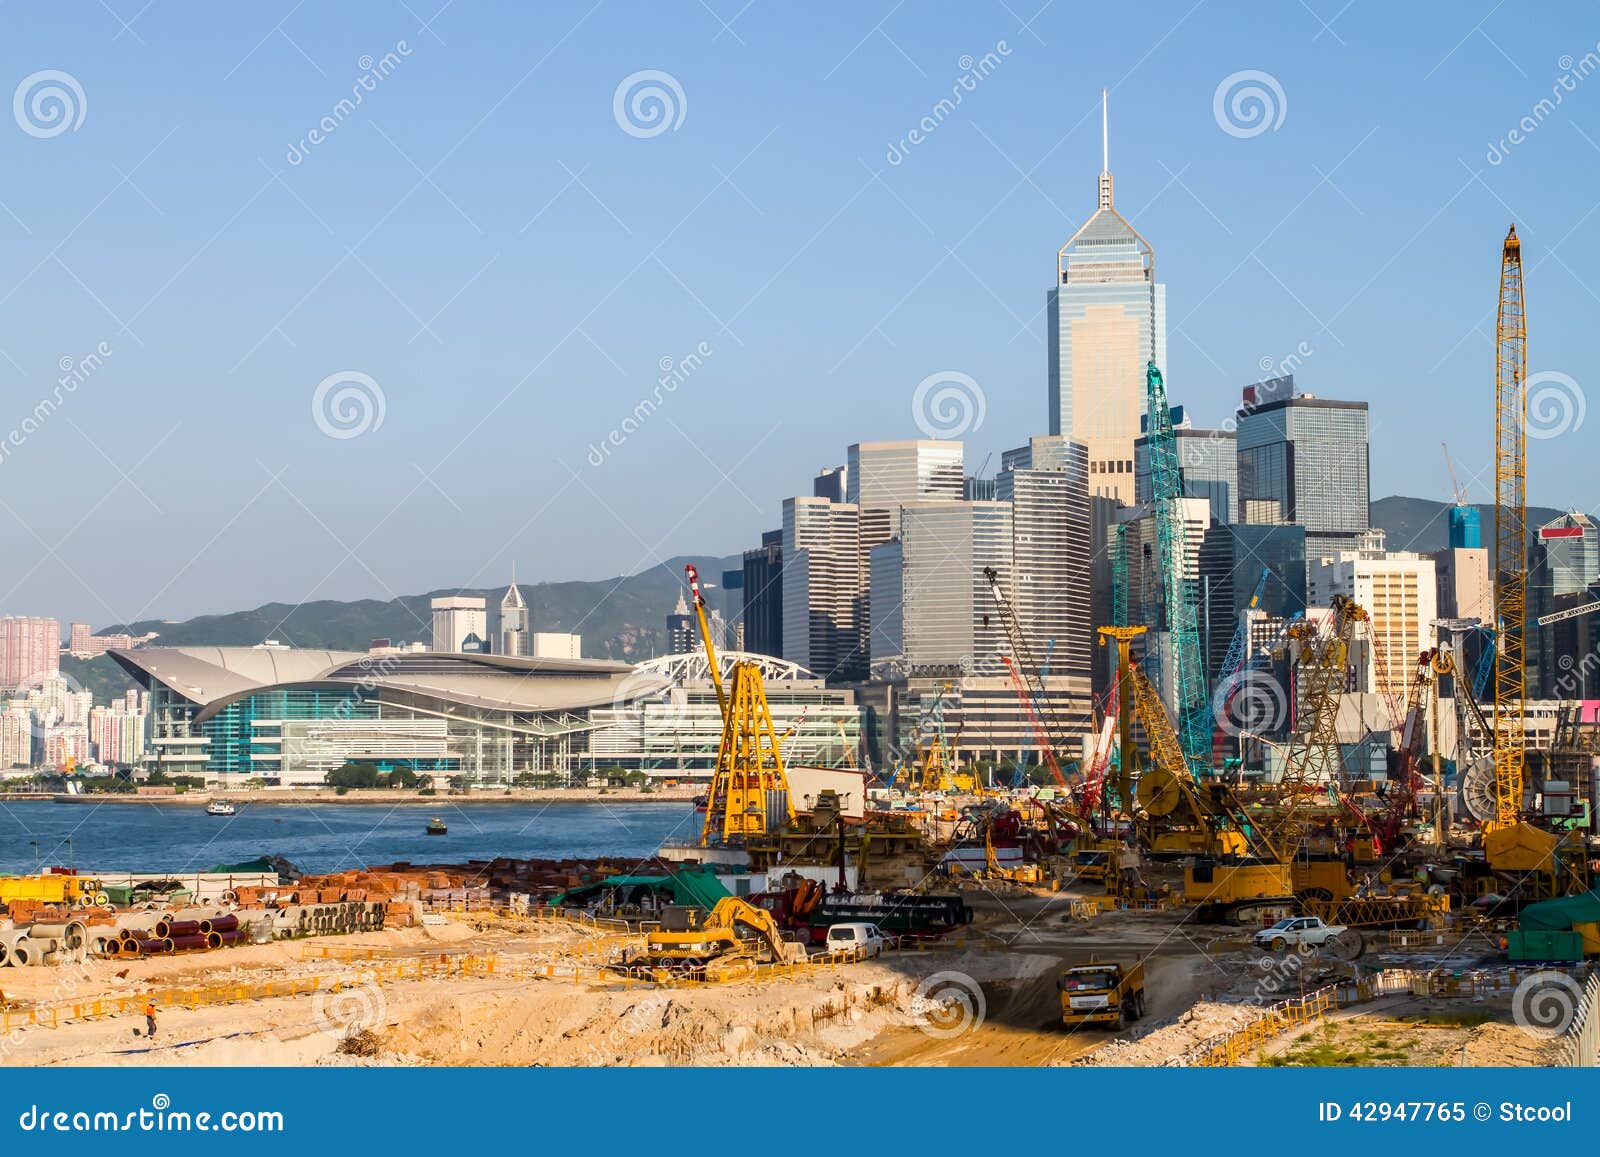 Major Construction Site In Central Hong Kong Stock Image - Image of center, construction: 42947765